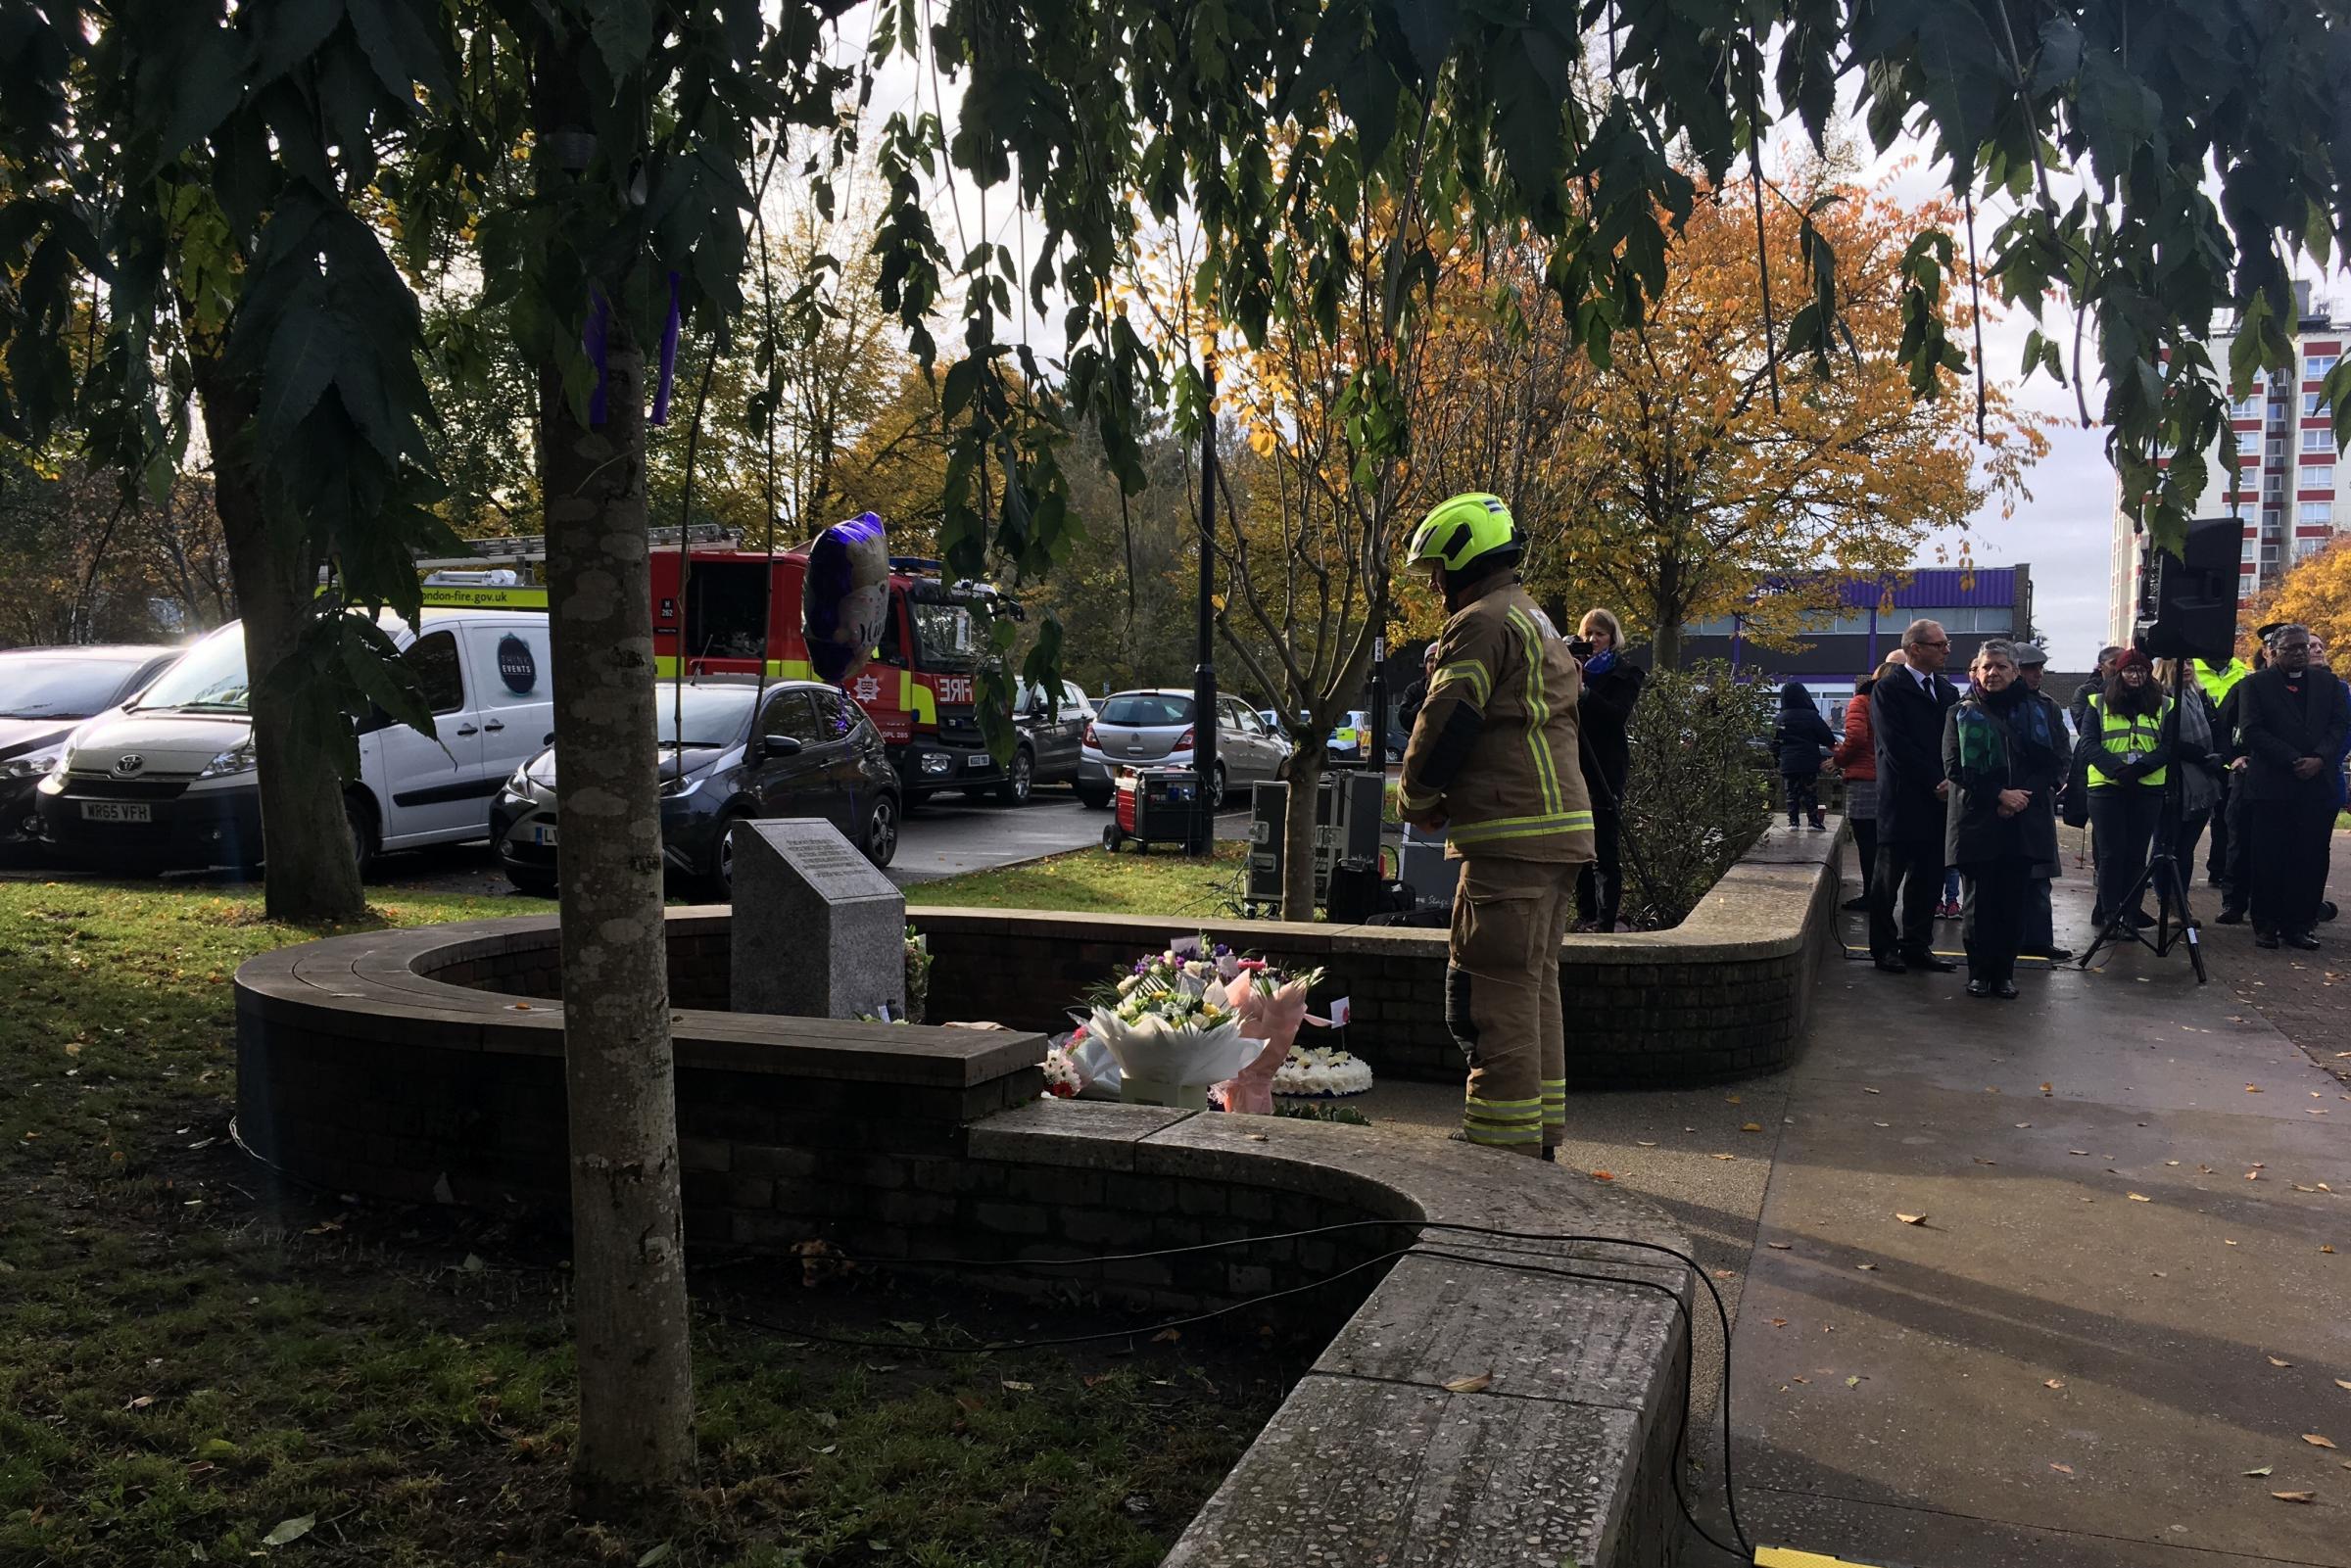 Tributes paid to Croydon tram crash victims three years after tragedy